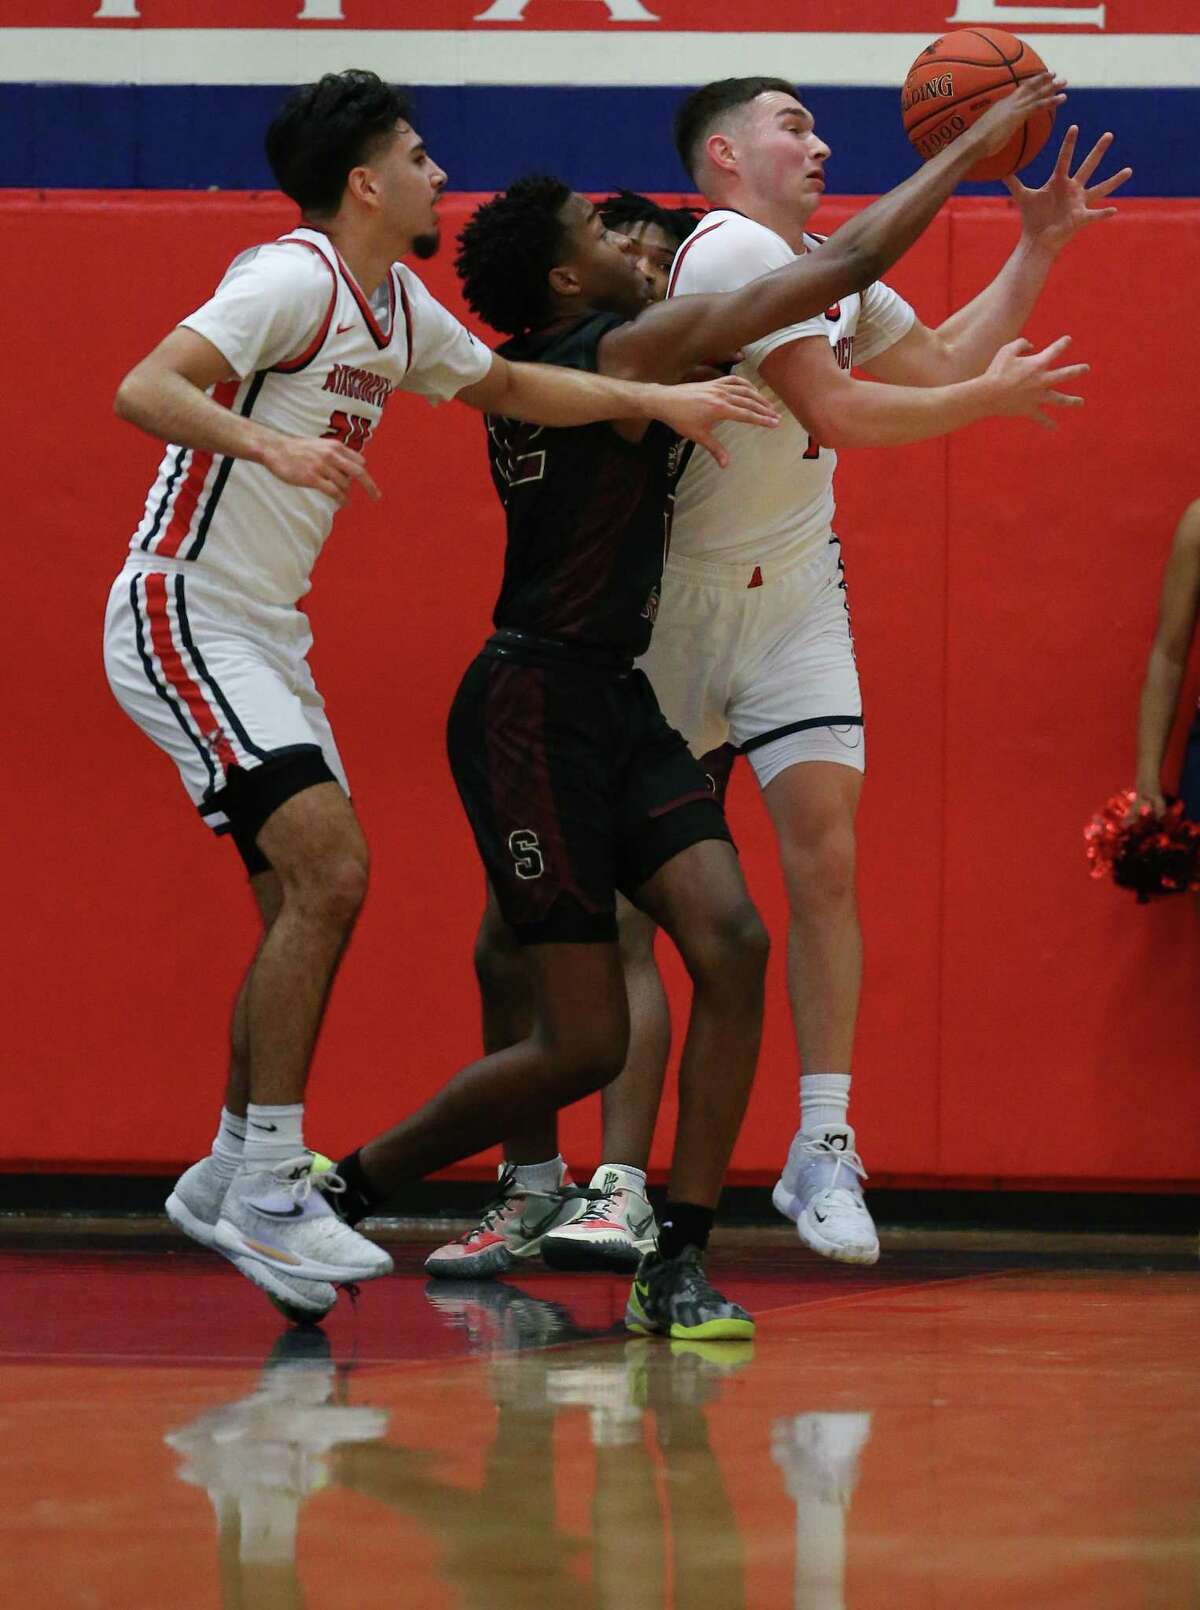 Atascocita’s David Martinez, left, and A.J. Aungst fight for a rebound with Summer Creek’s Cameron Patterson during a District 21-6A high school basketball game Friday, Dec. 17, 2021 in Humble.